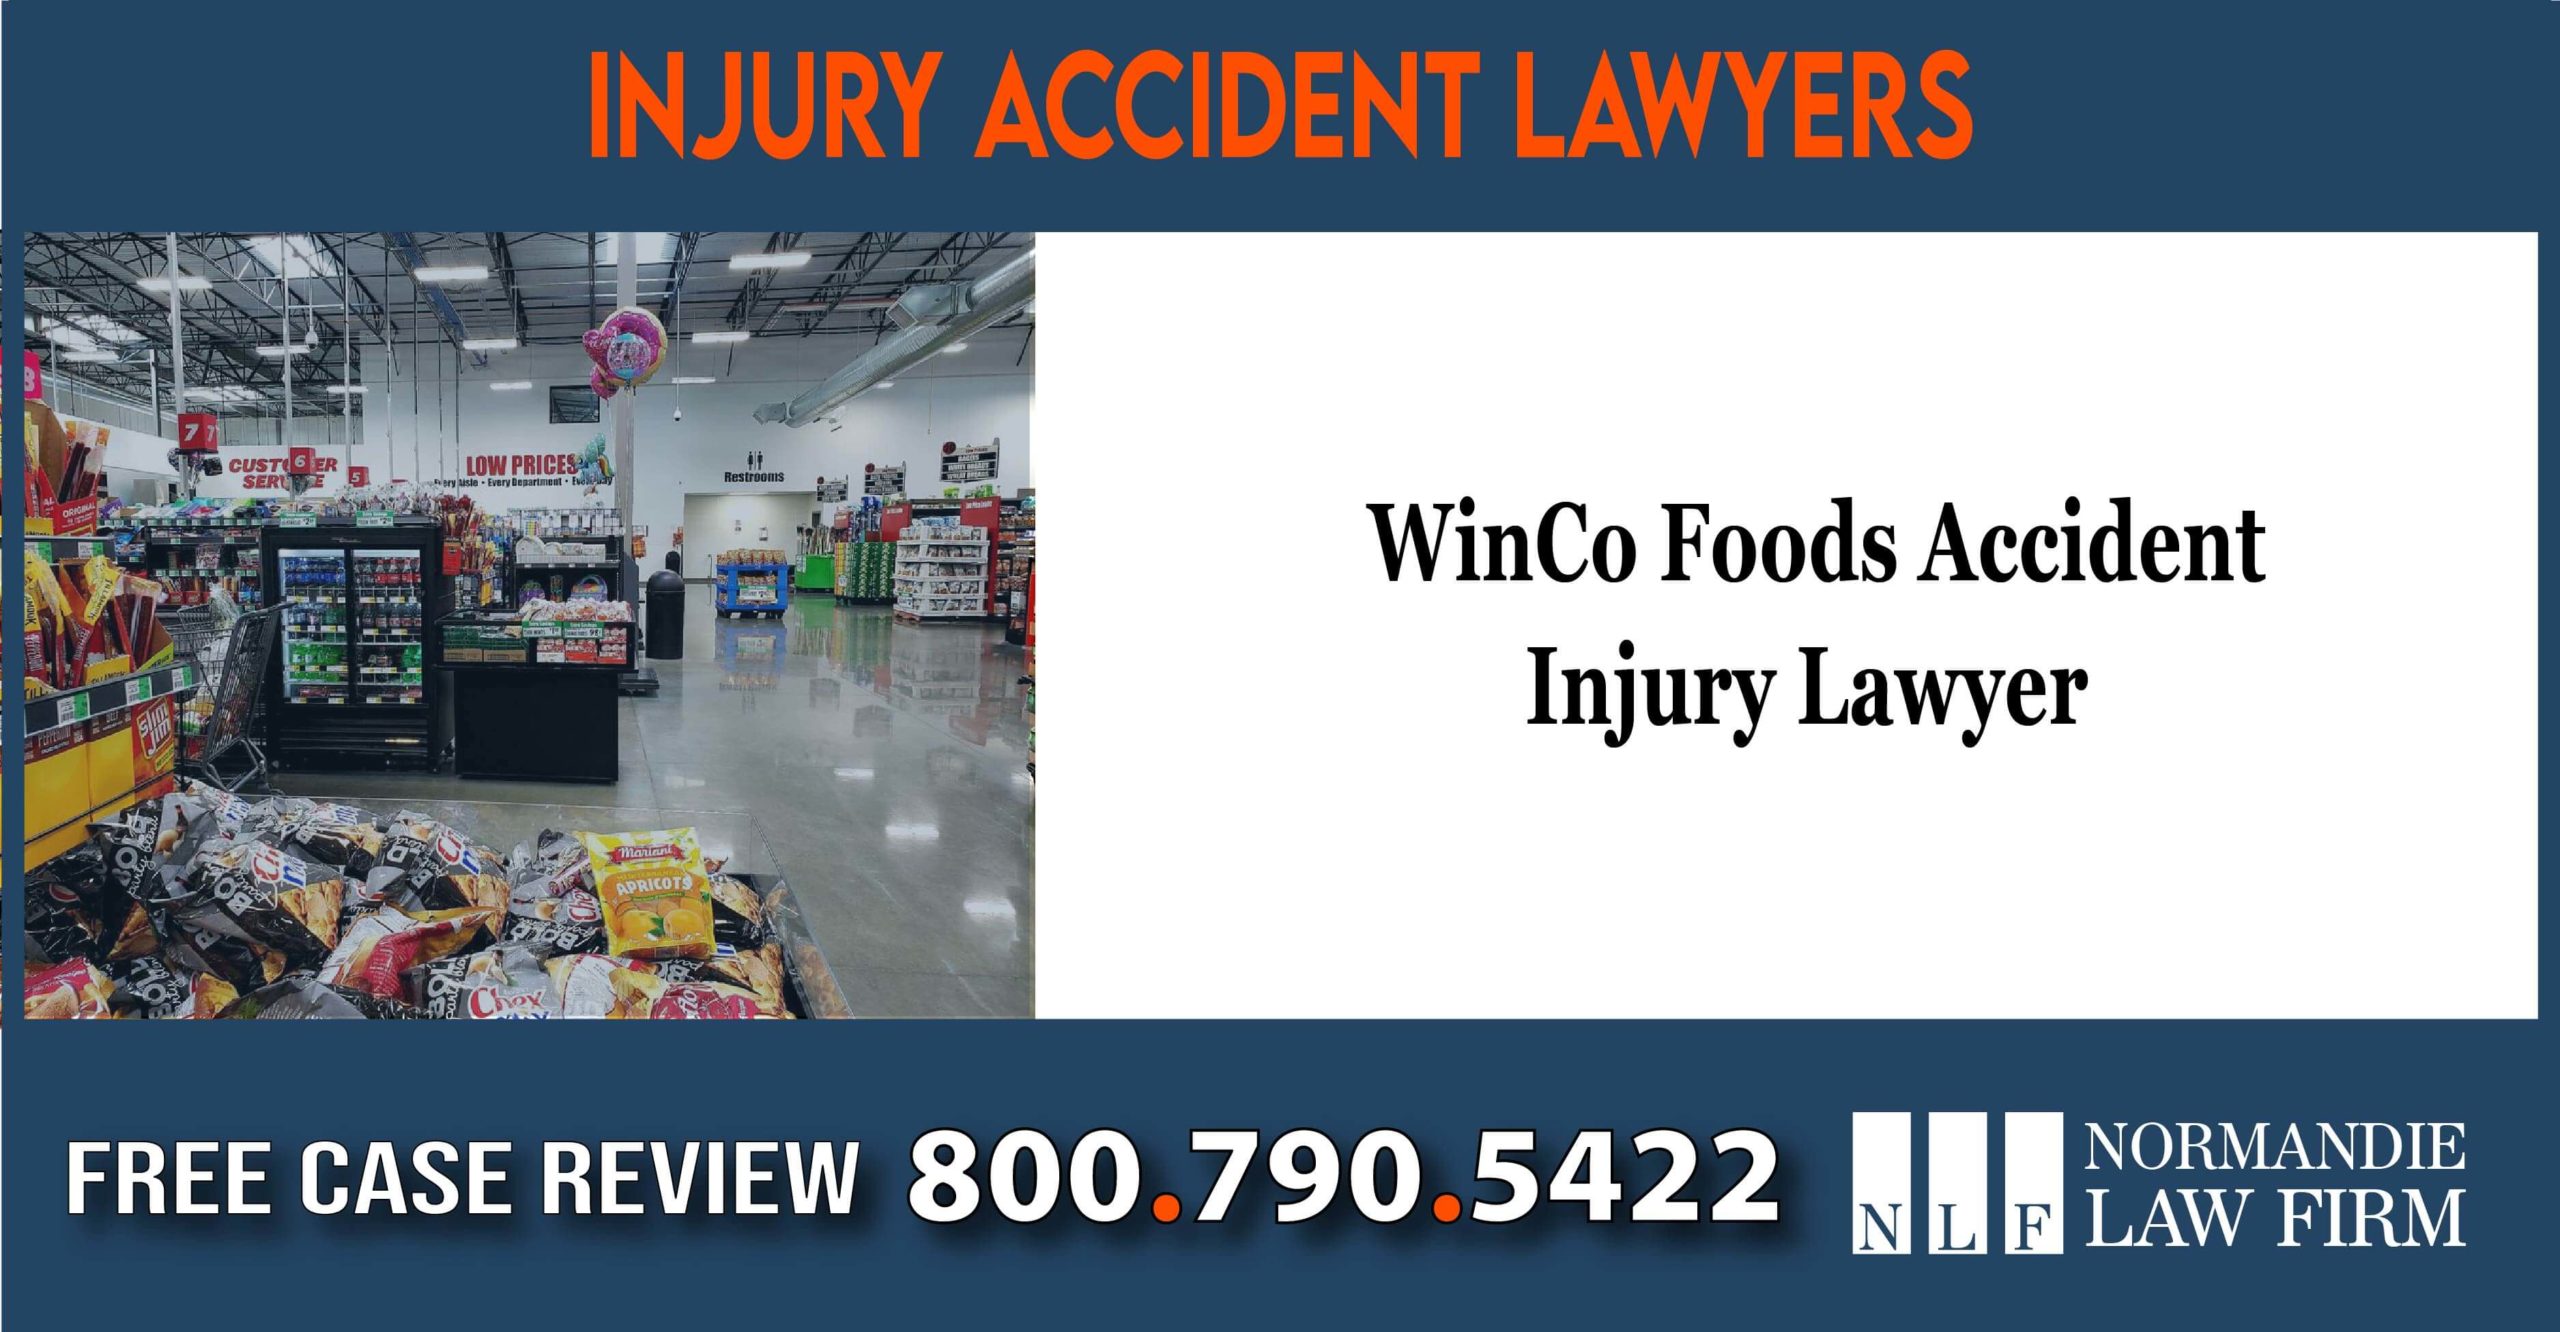 WinCo Foods Accident Injury Lawyer sue lawsuit attorney compensation incident attorney